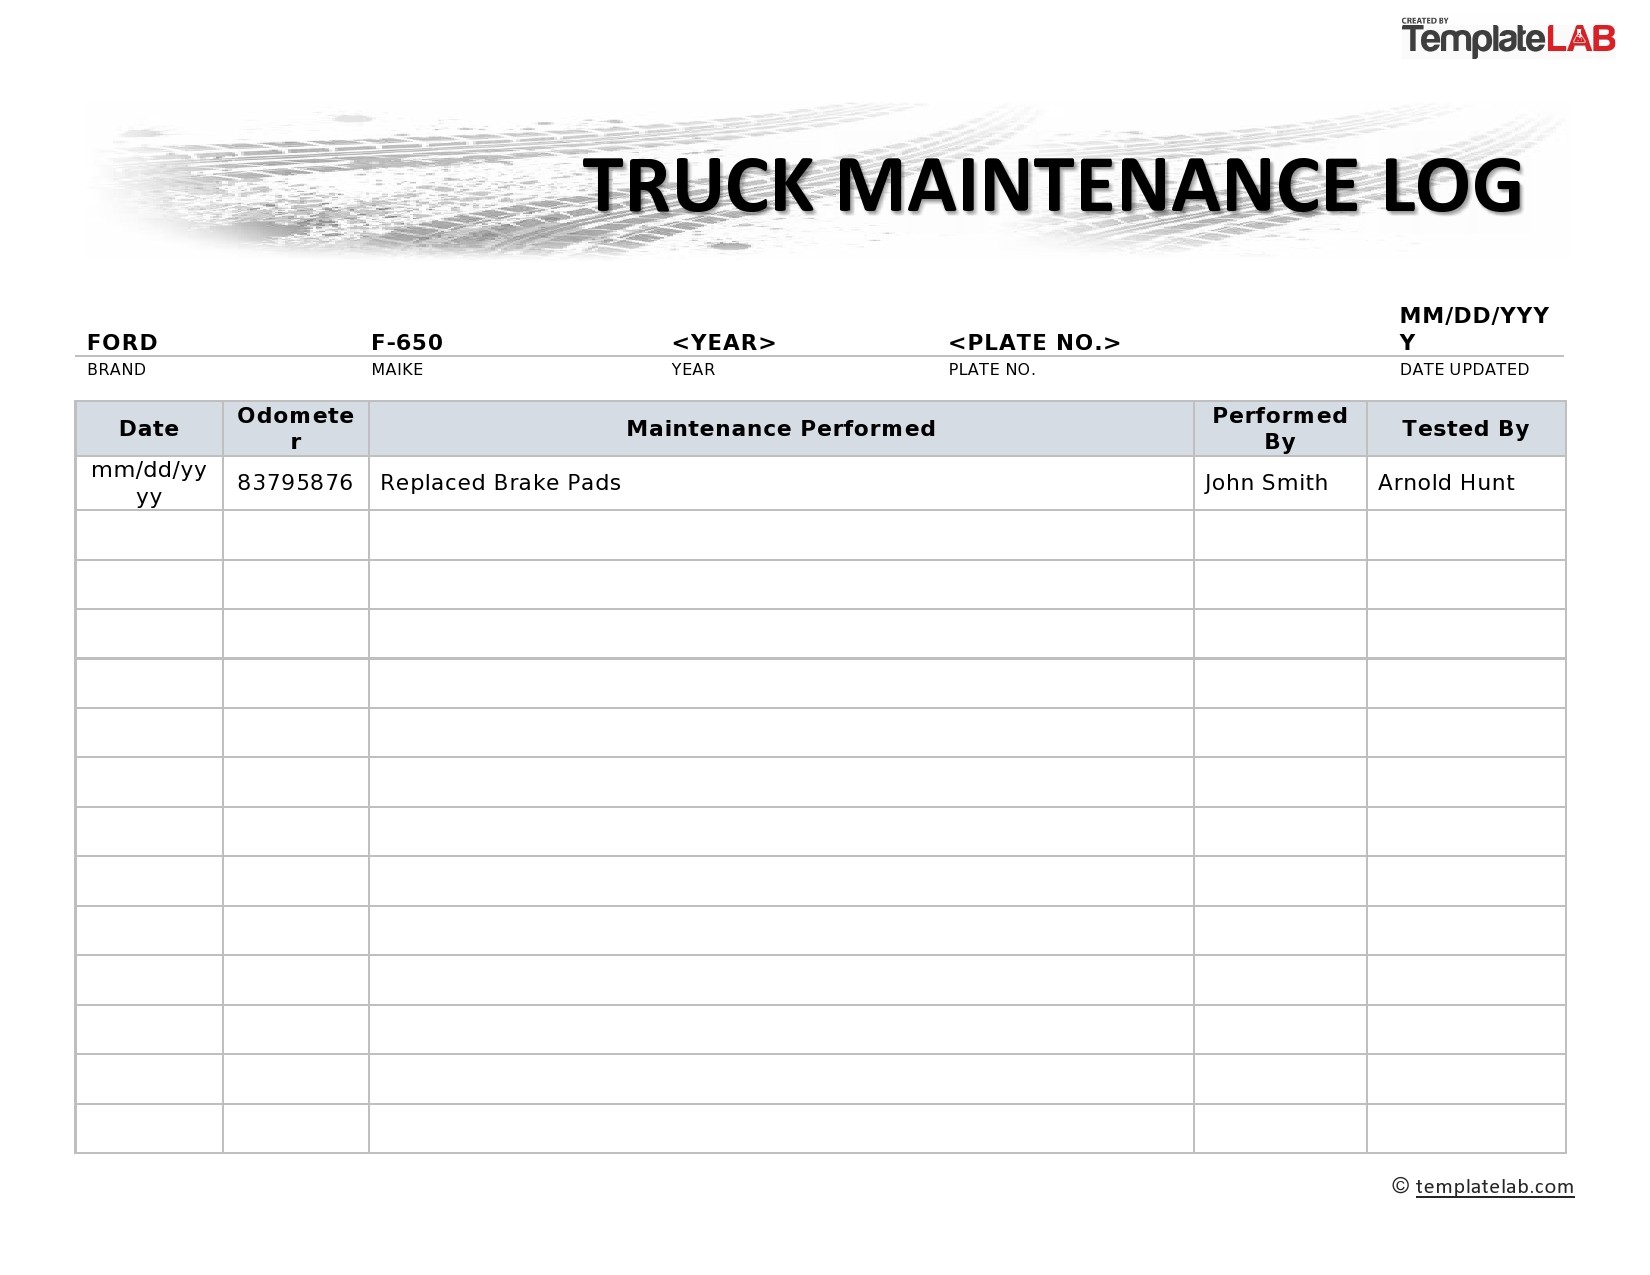 5 Construction Equipment Auto Service Repair Log Book Tractor 5pk.: Automotive OSHA Approved Boat Peaceful Creek Manuals Maintenance Record Truck Recreational Vehicle